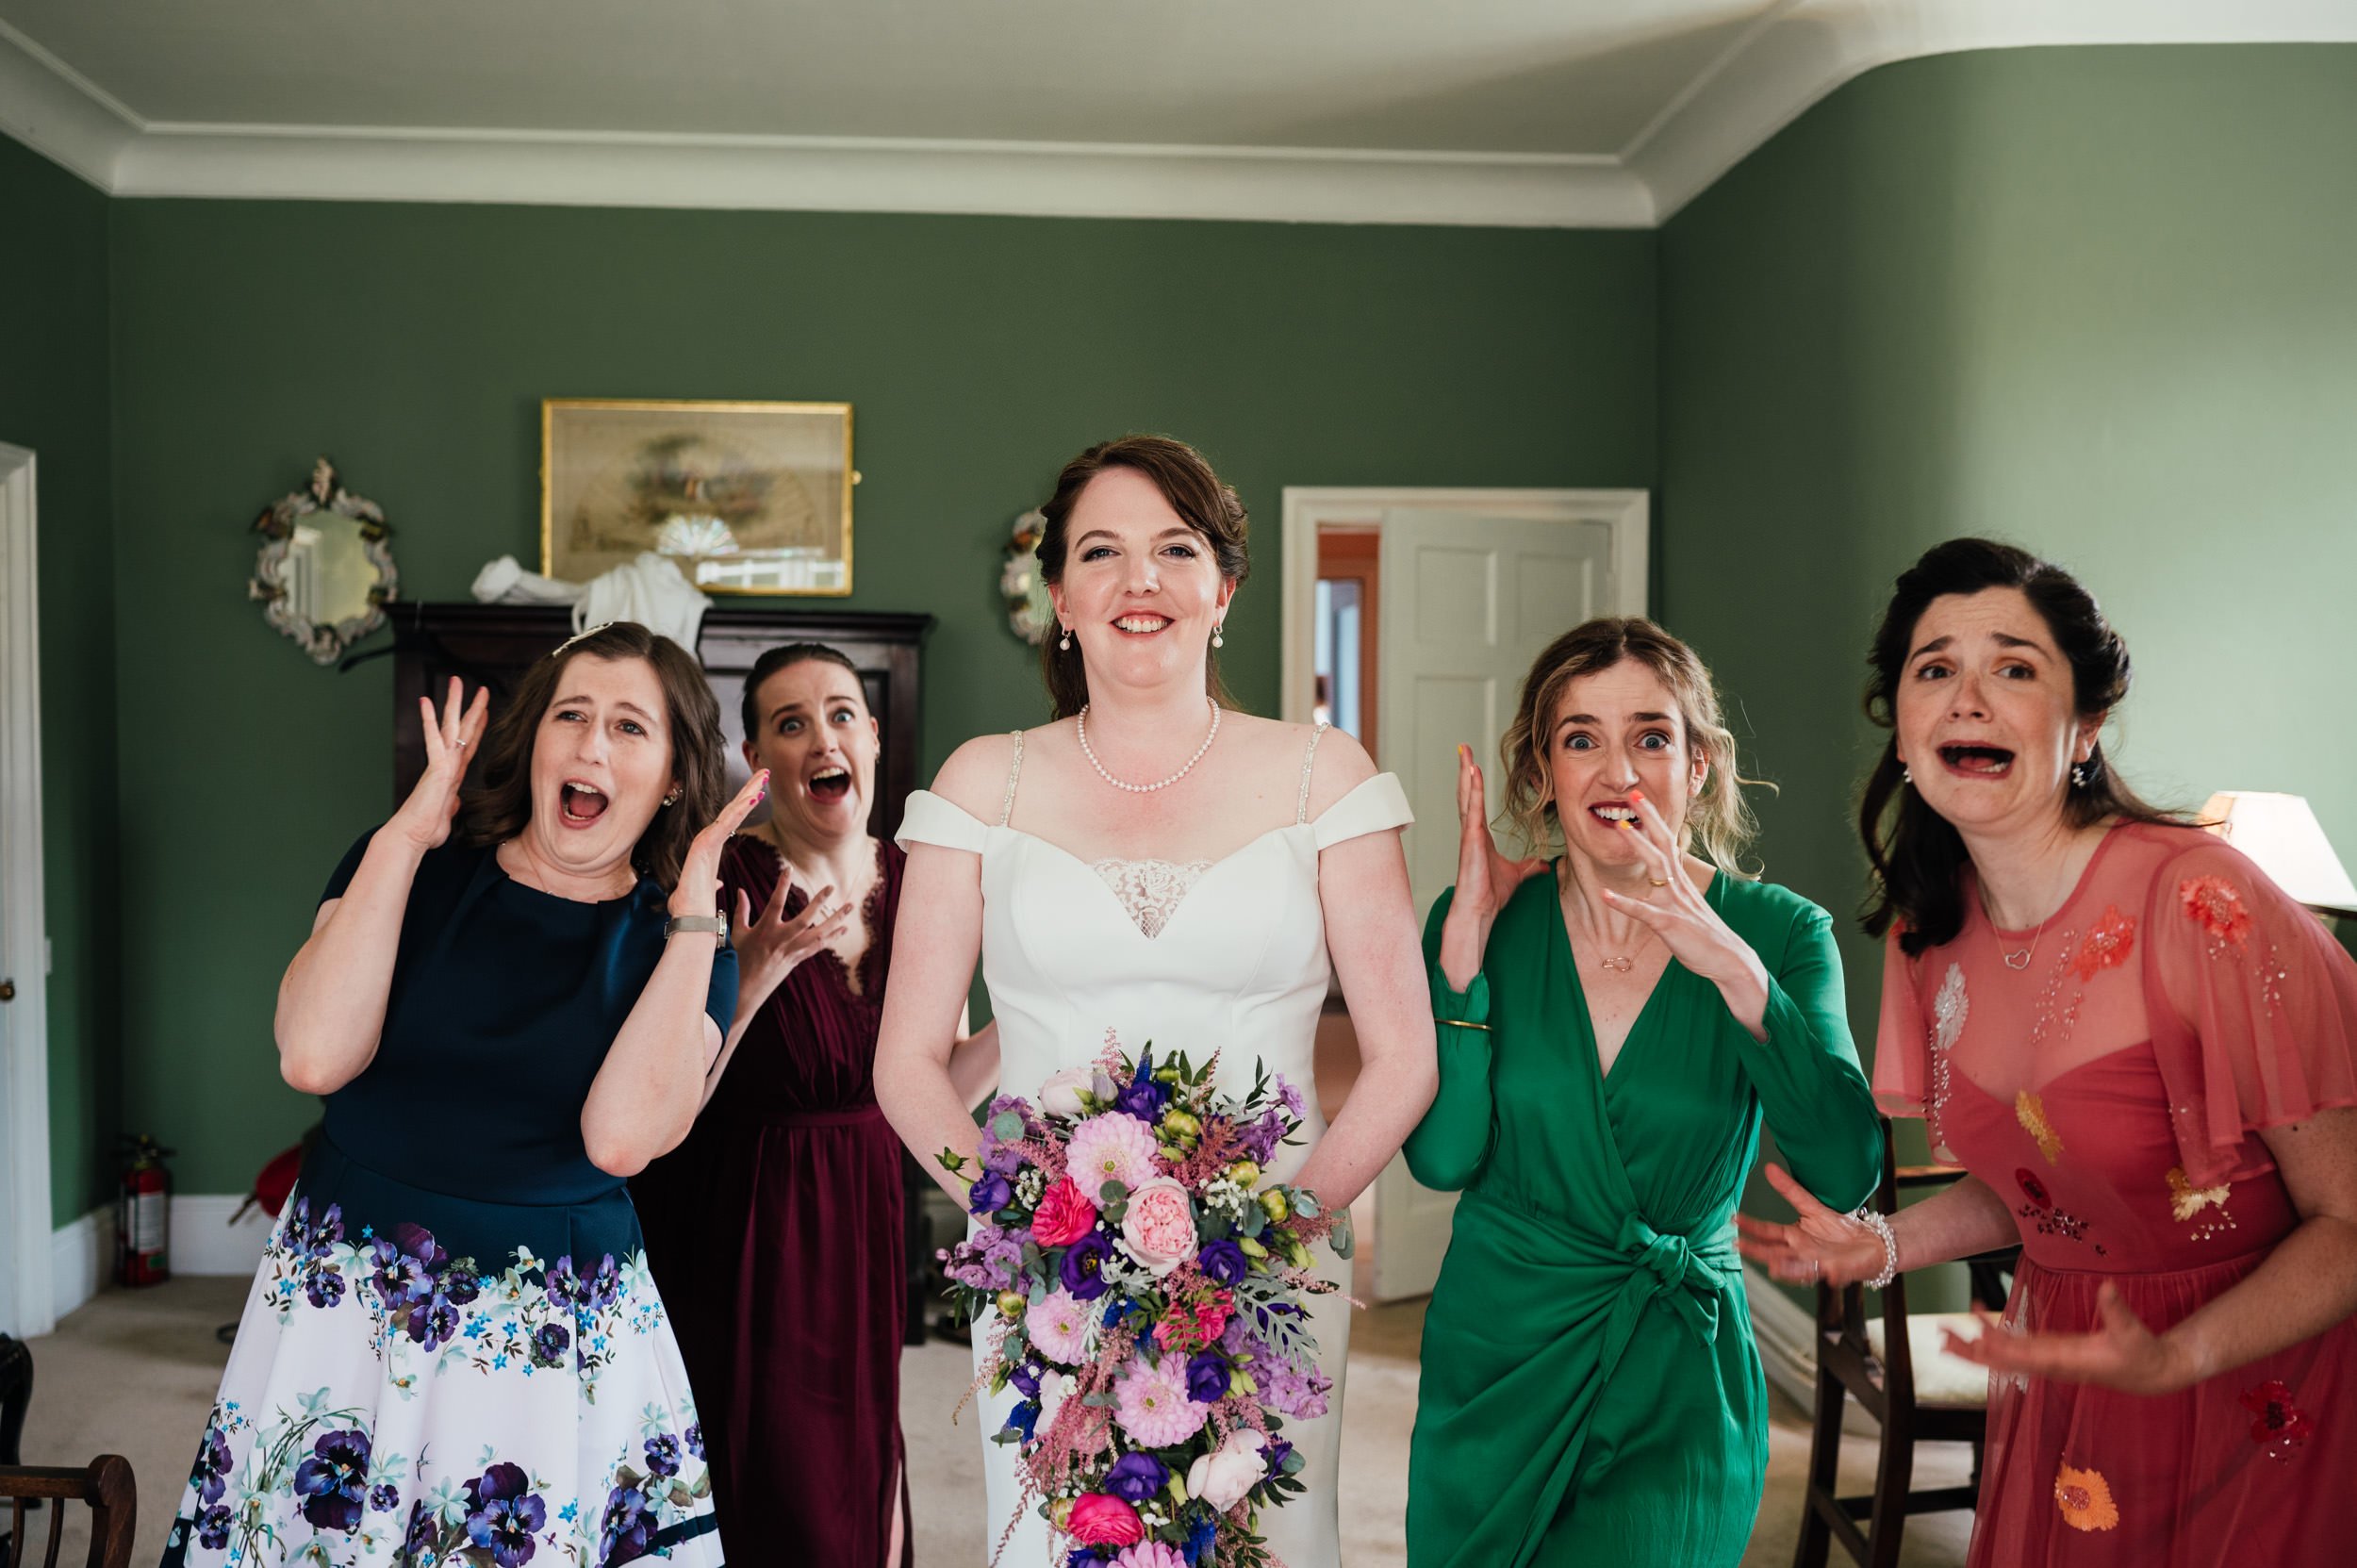  a picture of the bride and bridesmaids laughing